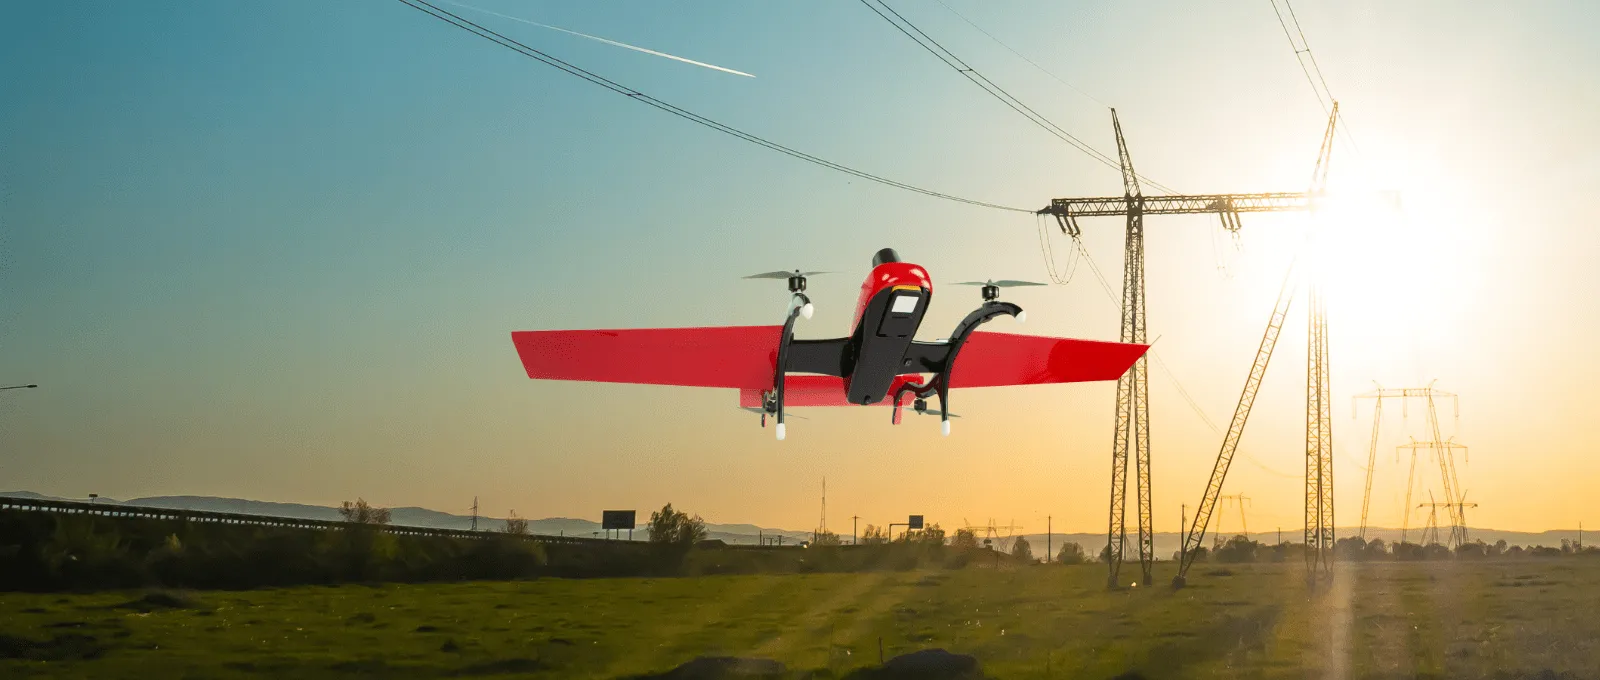 FIXAR and YellowScan partner for lidar-enabled drone solution